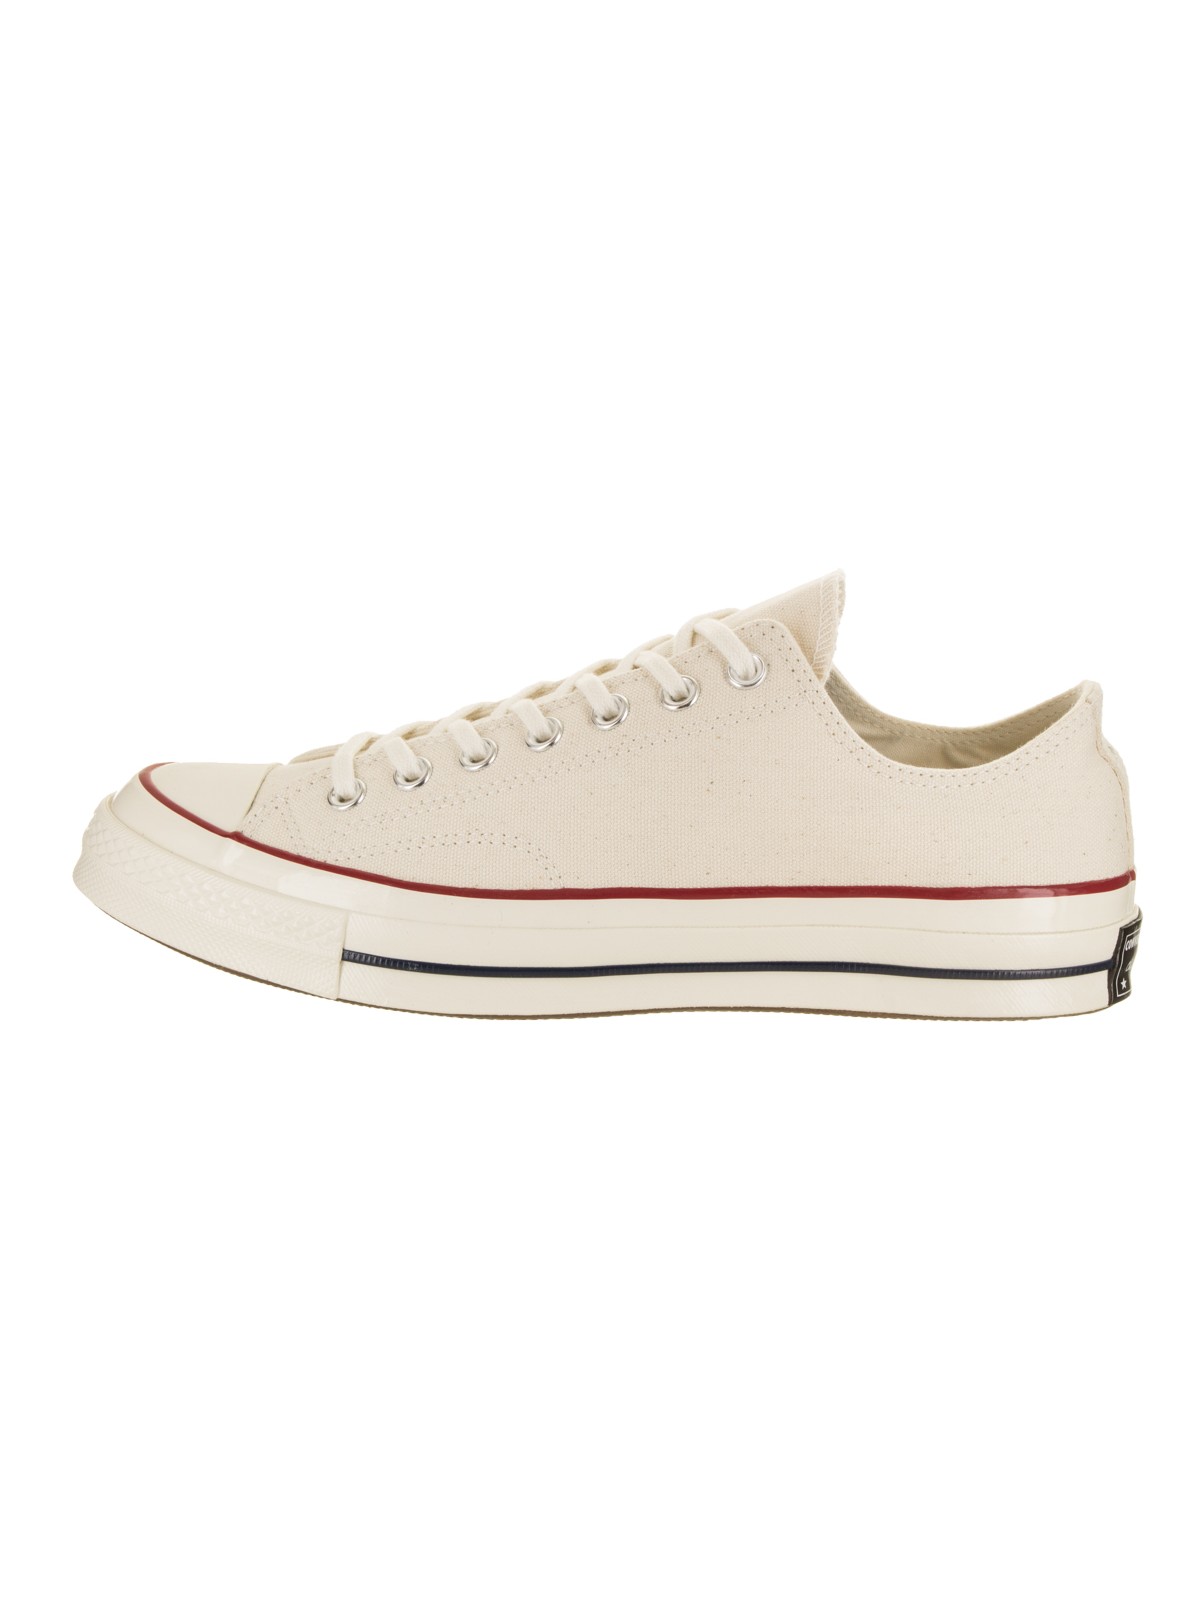 Converse Unisex Chuck Taylor All Star 70 Ox Basketball Shoe - image 3 of 5